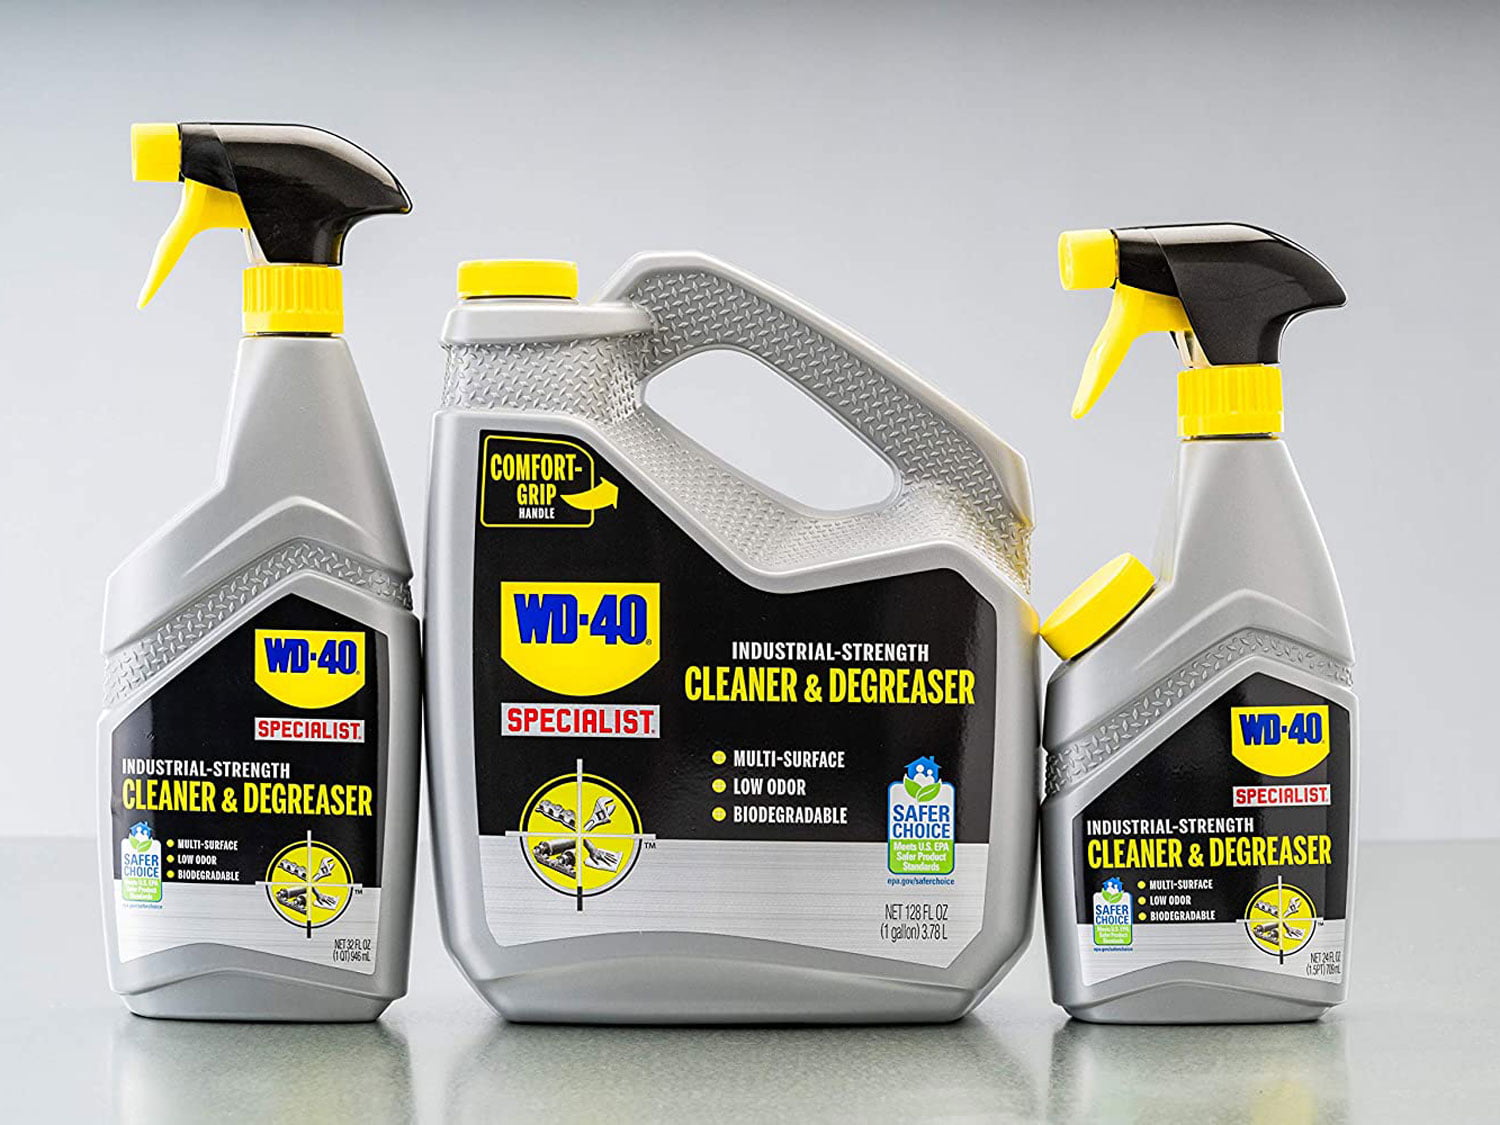 WD-40 Cleaner & Degreaser